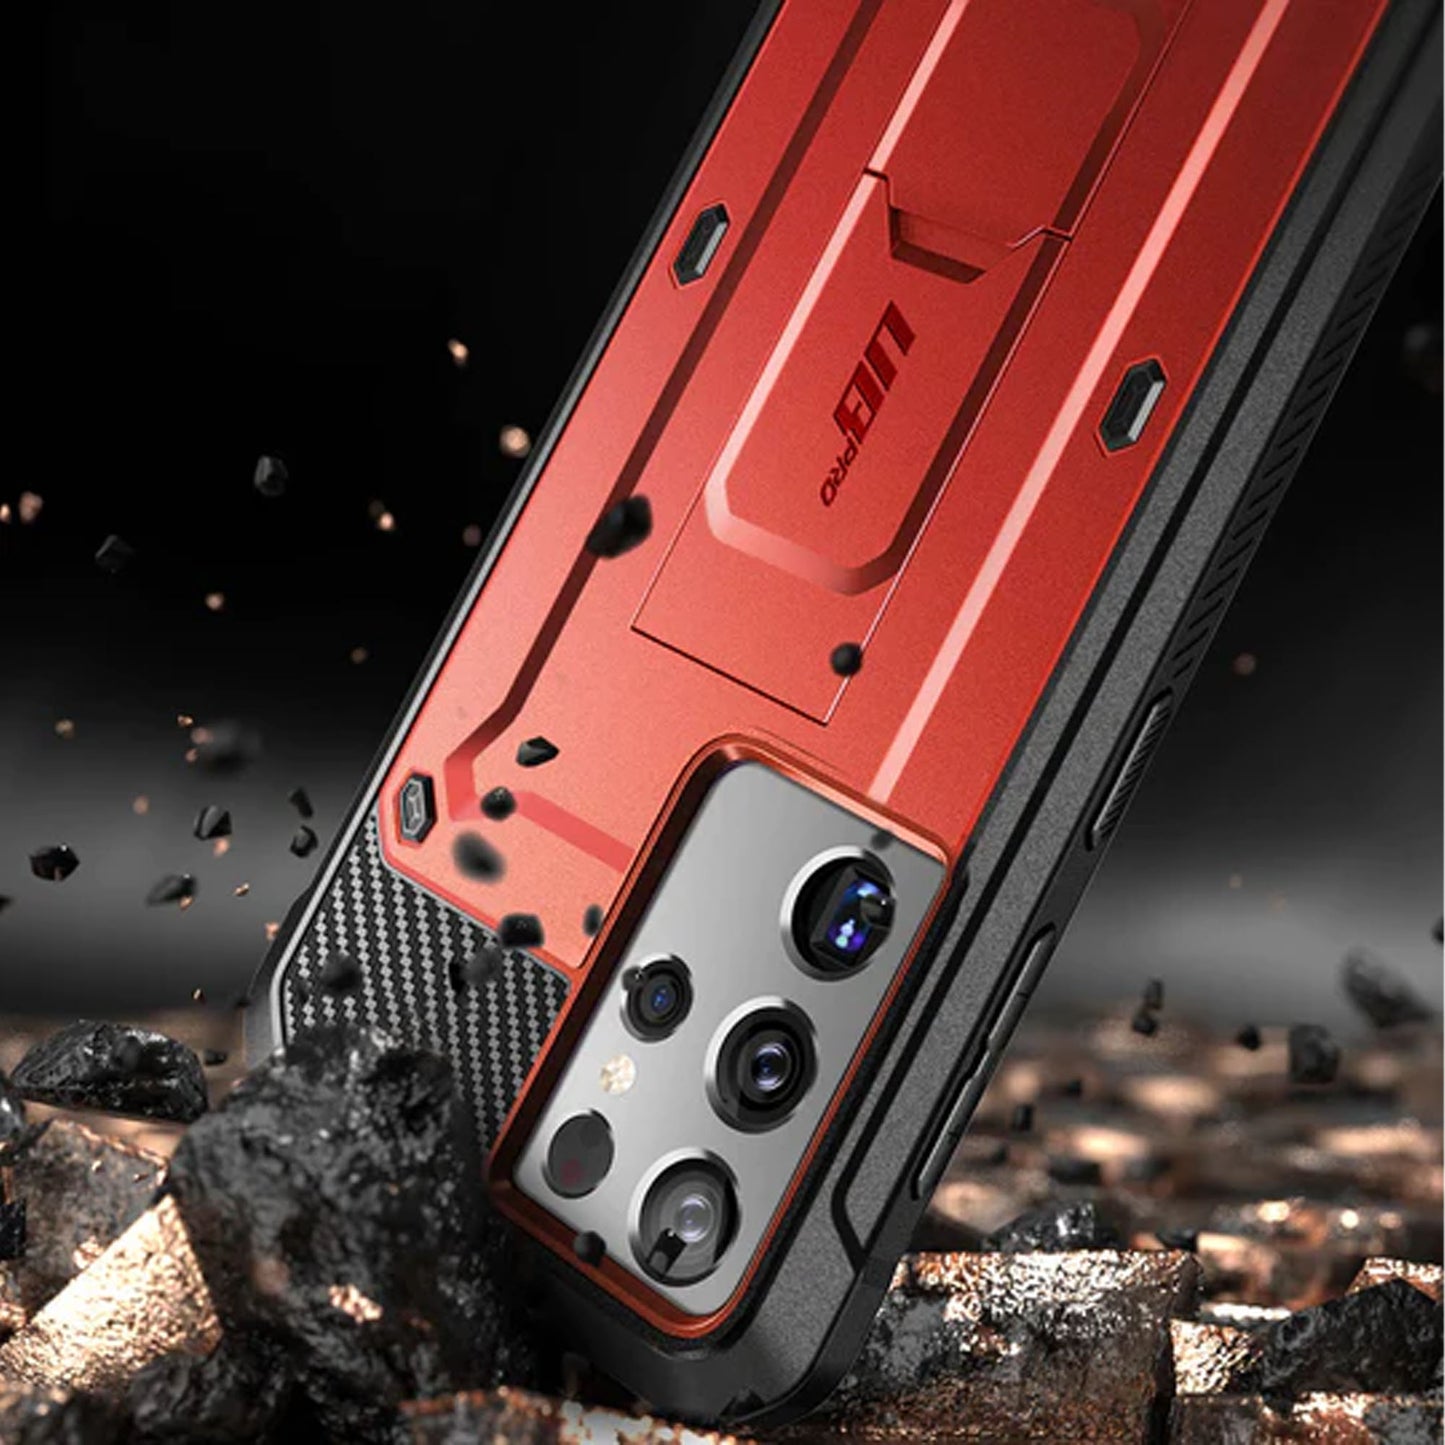 Supcase Unicorn Beetle Pro Rugged Case for Samsung Galaxy S21 FE with Built-in Screen Protector - Metallic Red (Barcode: 843439113381 )